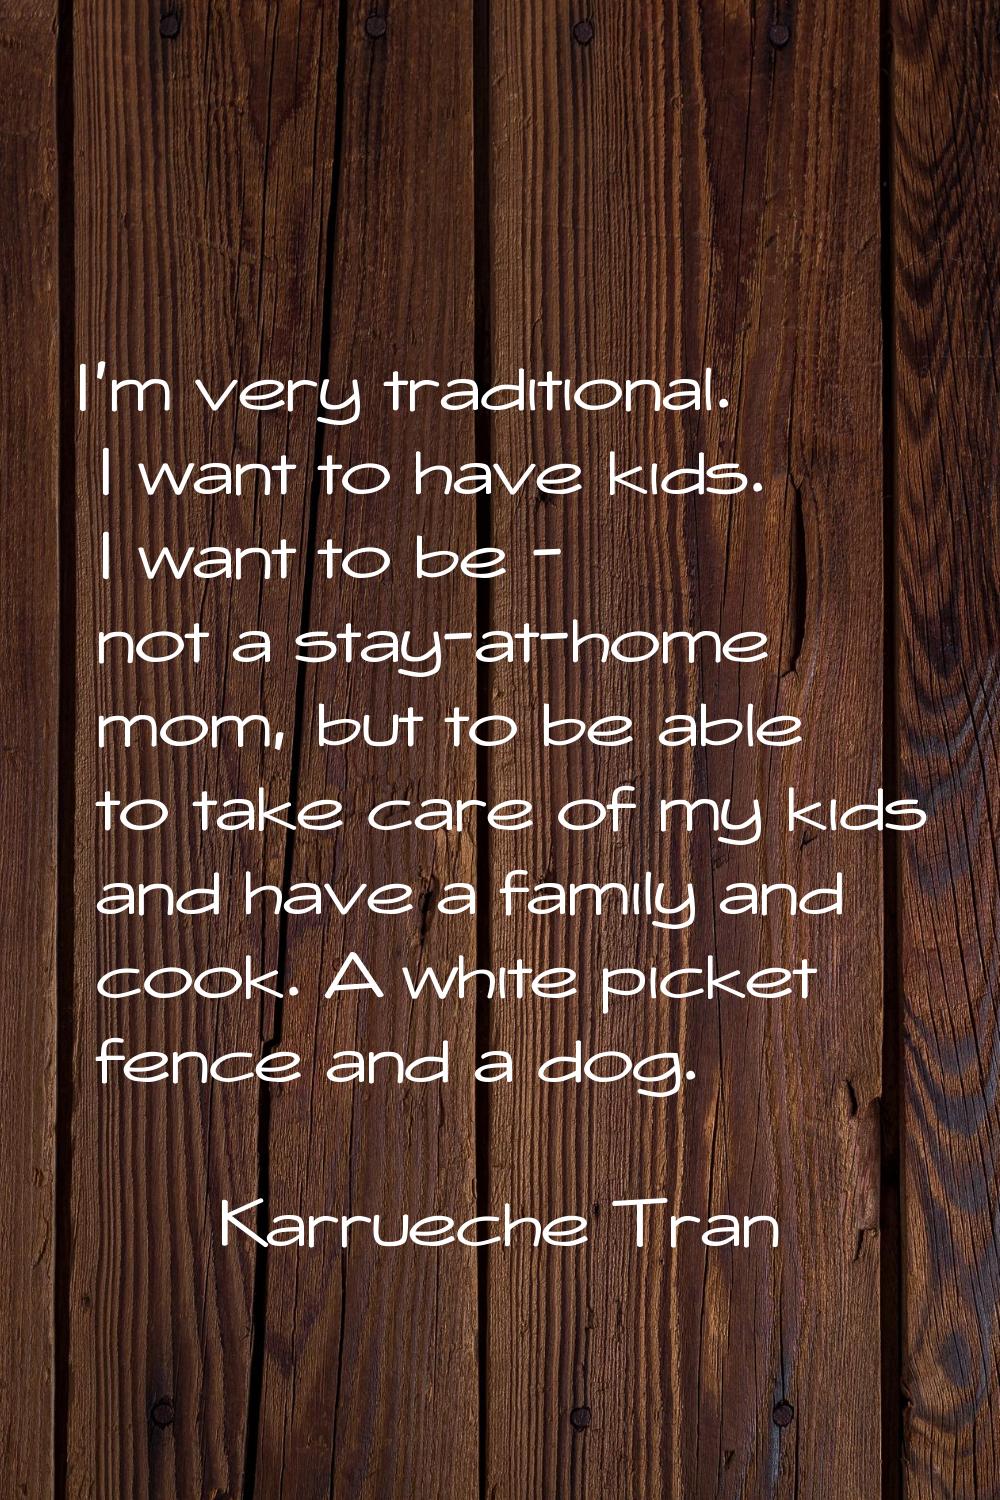 I'm very traditional. I want to have kids. I want to be - not a stay-at-home mom, but to be able to